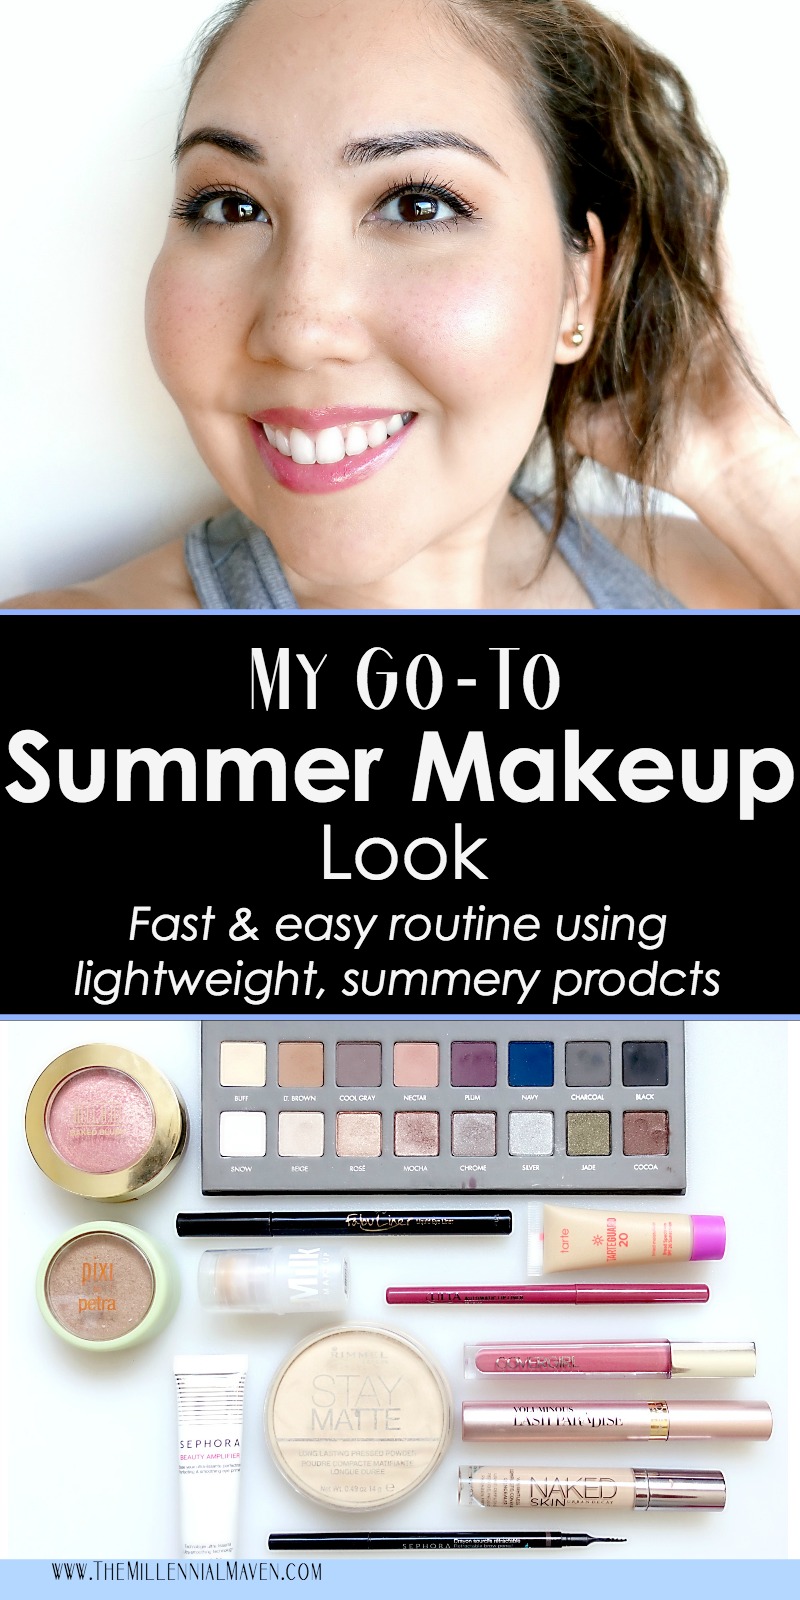 My Go-To Summer Makeup Look (Easy routine using lightweight products!)